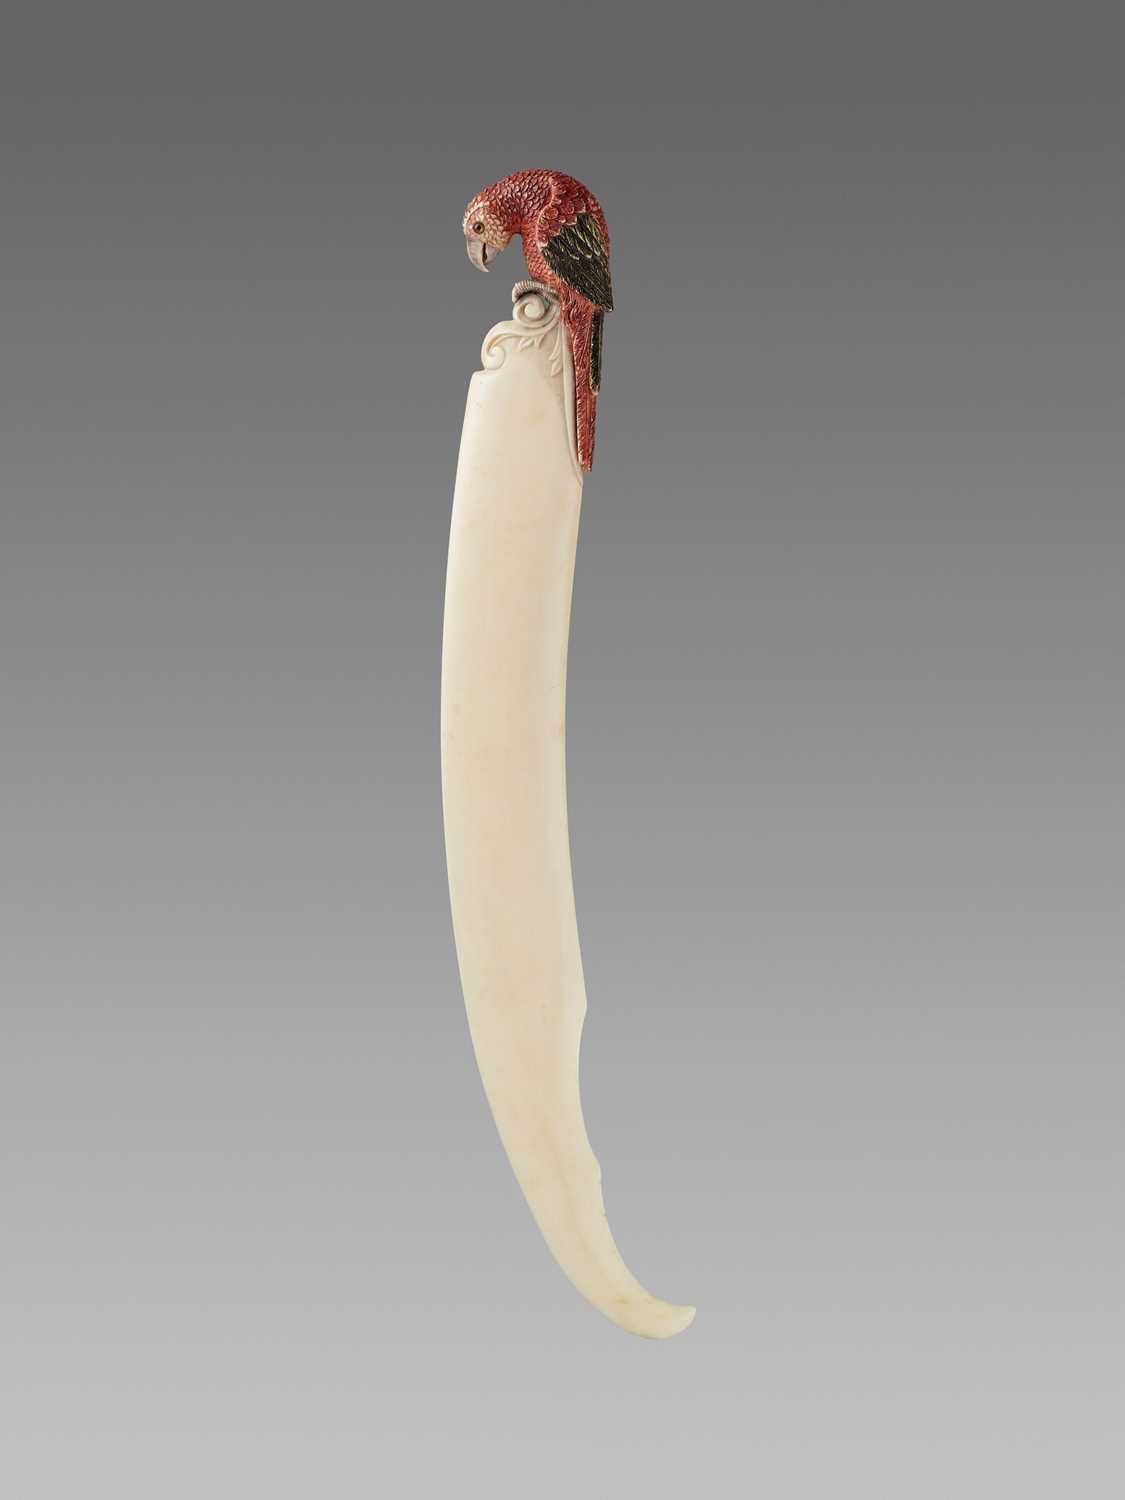 Lot 95 - A DECORATIVE IVORY DAGGER WITH A LONG-TAILED PARROT